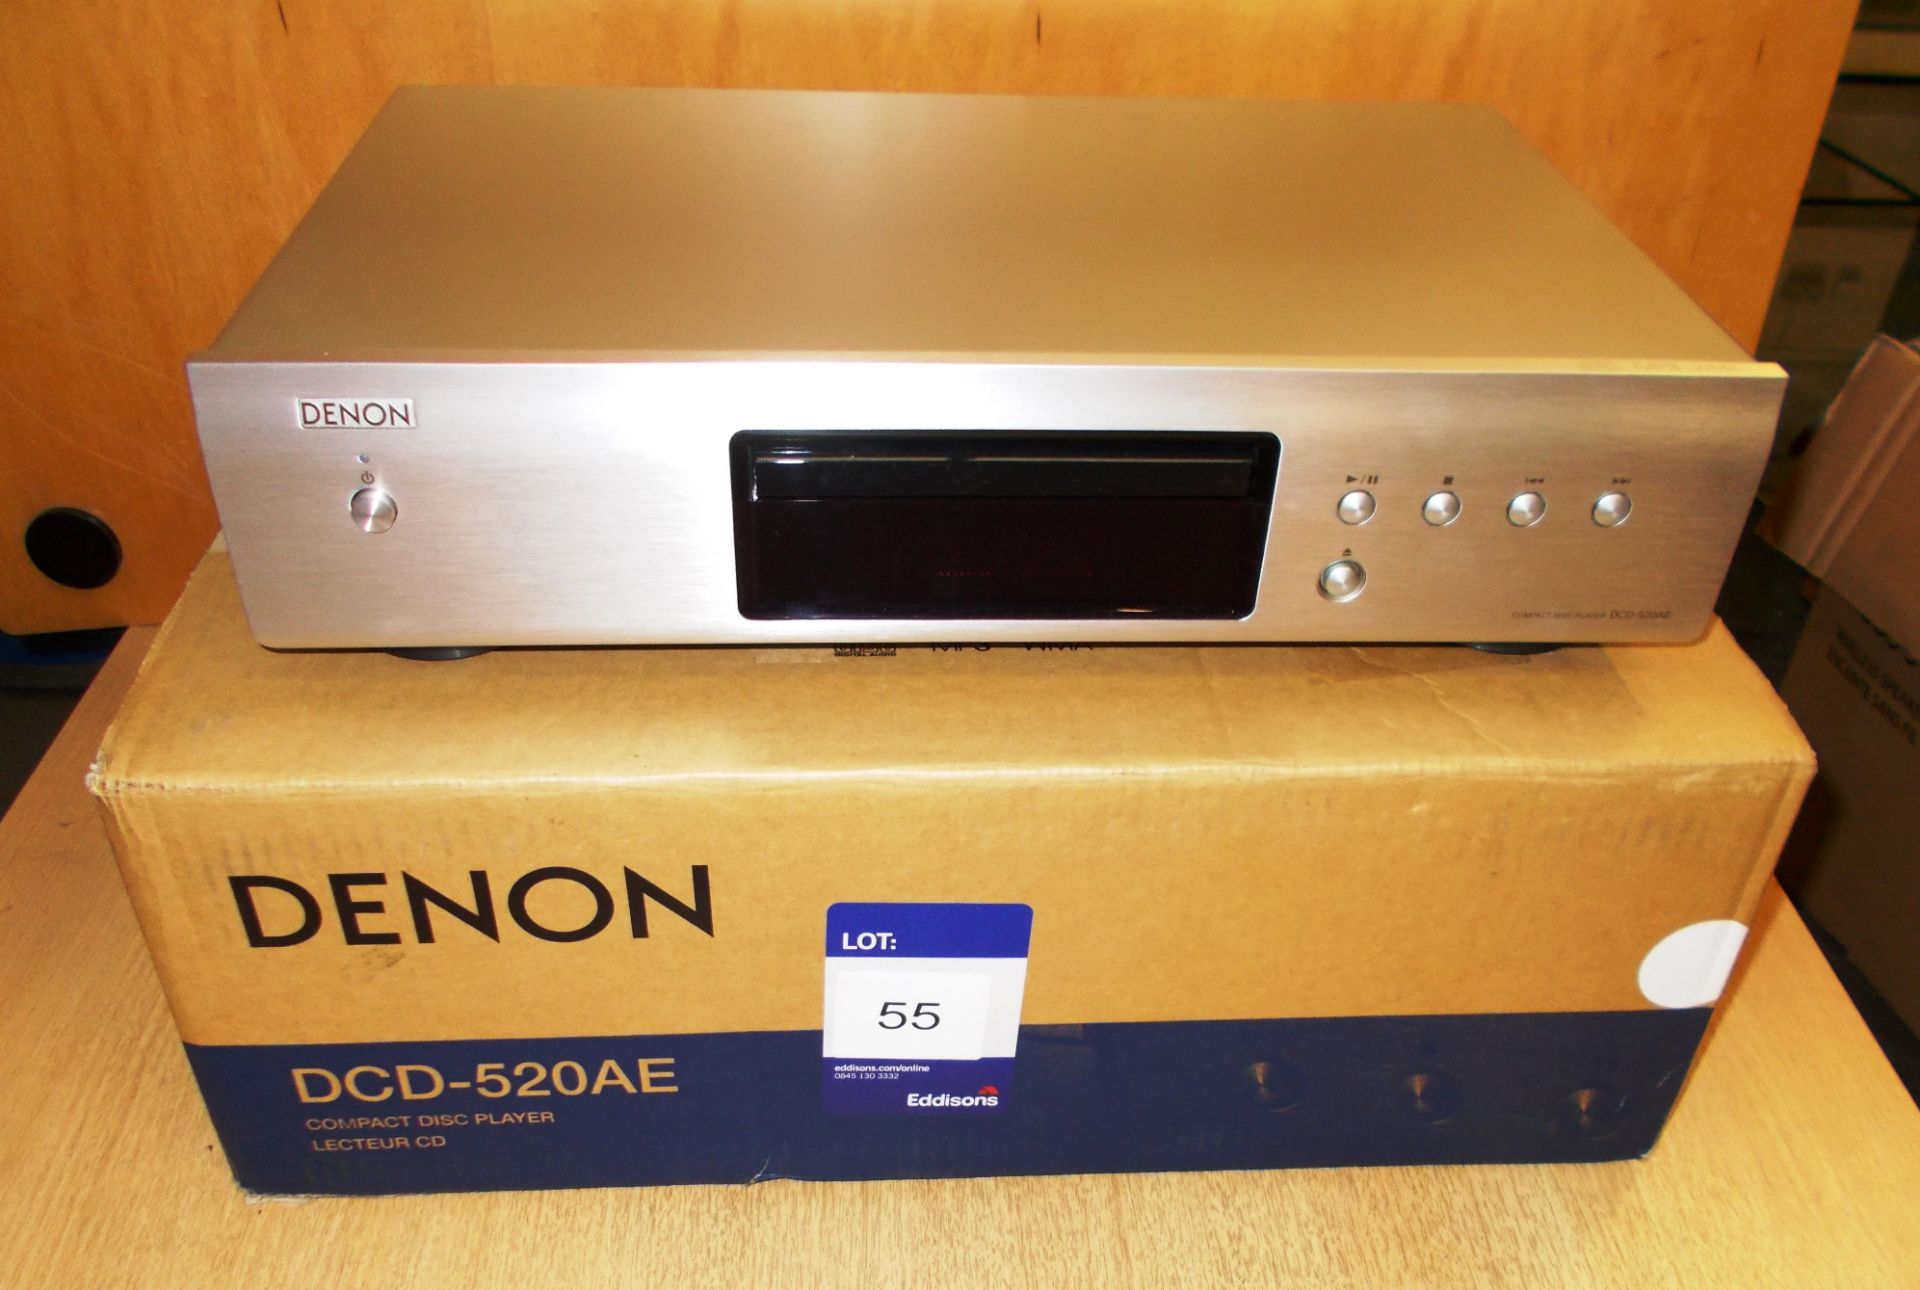 Denon DCD-520 AE Compact Disc Player, silver (on display) – RRP £170 (collection Monday 29 April